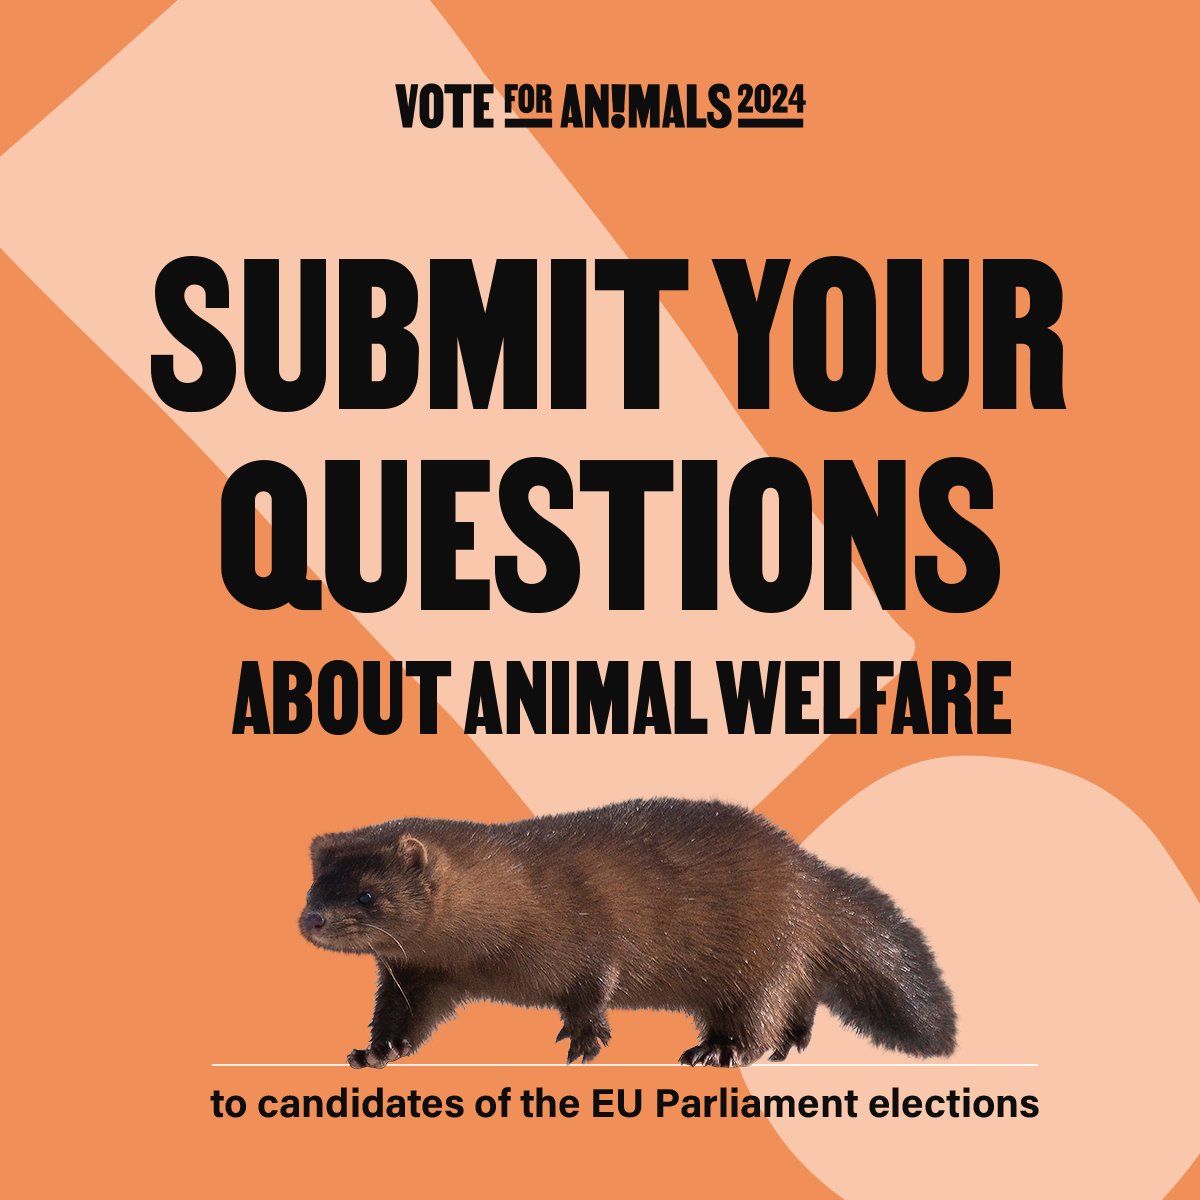 Do you have a question about #animalwelfare topics for the #EUelections2024 candidates? Send it to us by 8 April: 📩 send us a DM 💬 leave a comment The candidates will respond during our session on 25 April which you can follow live. #VoteforAnimals